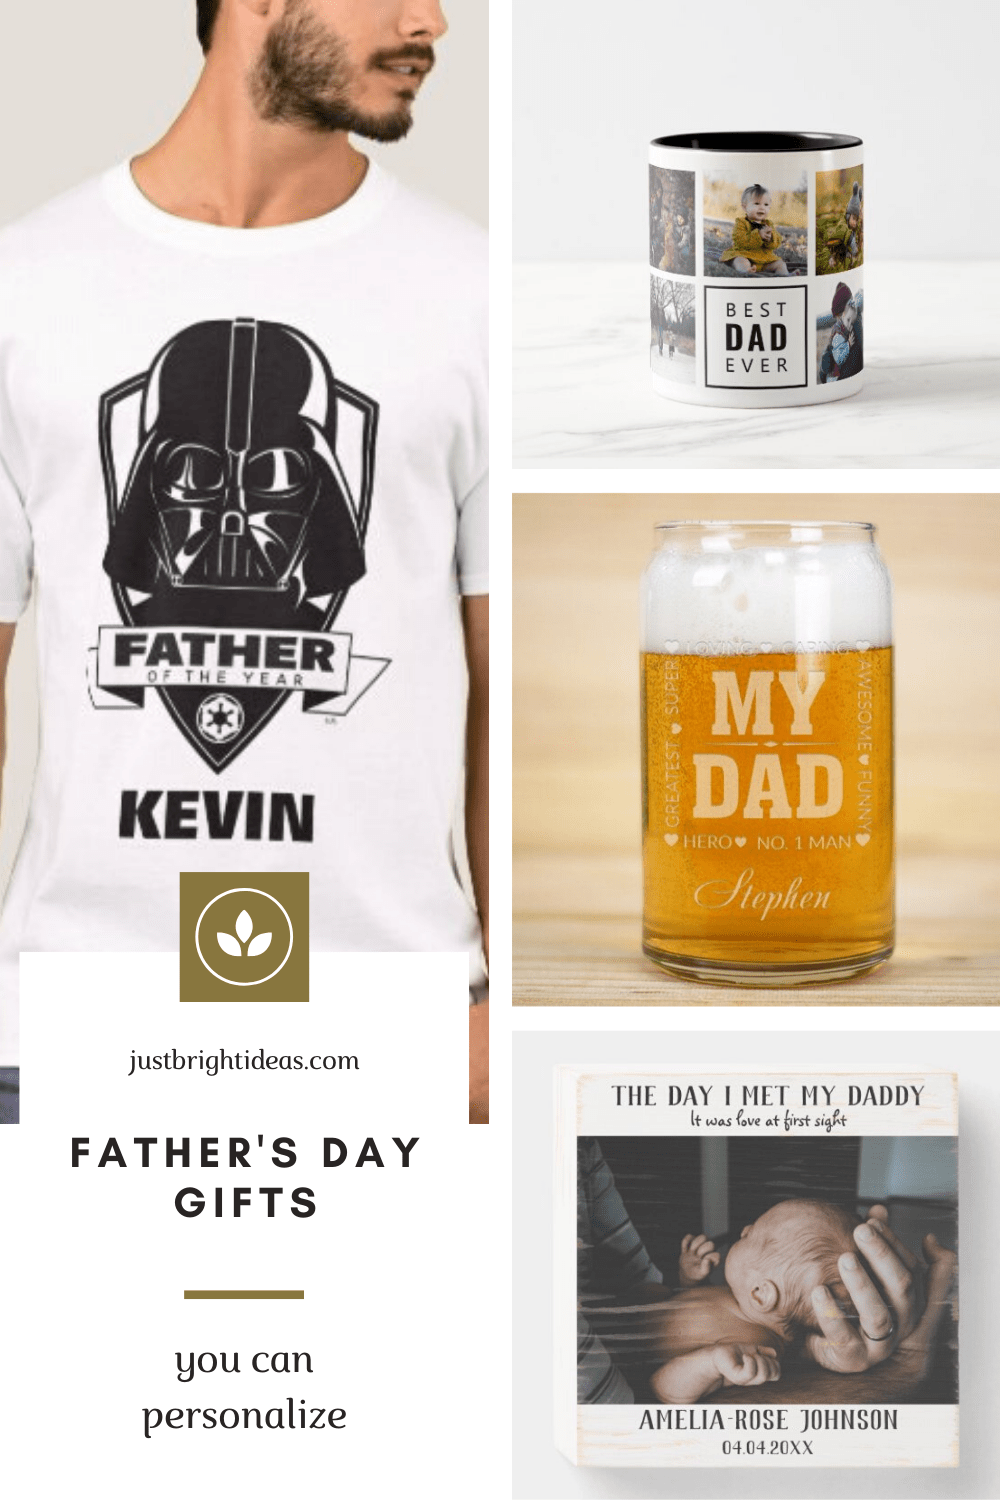 These unique Father's Day gifts can be personalized with photos or names to make them extra special for dad